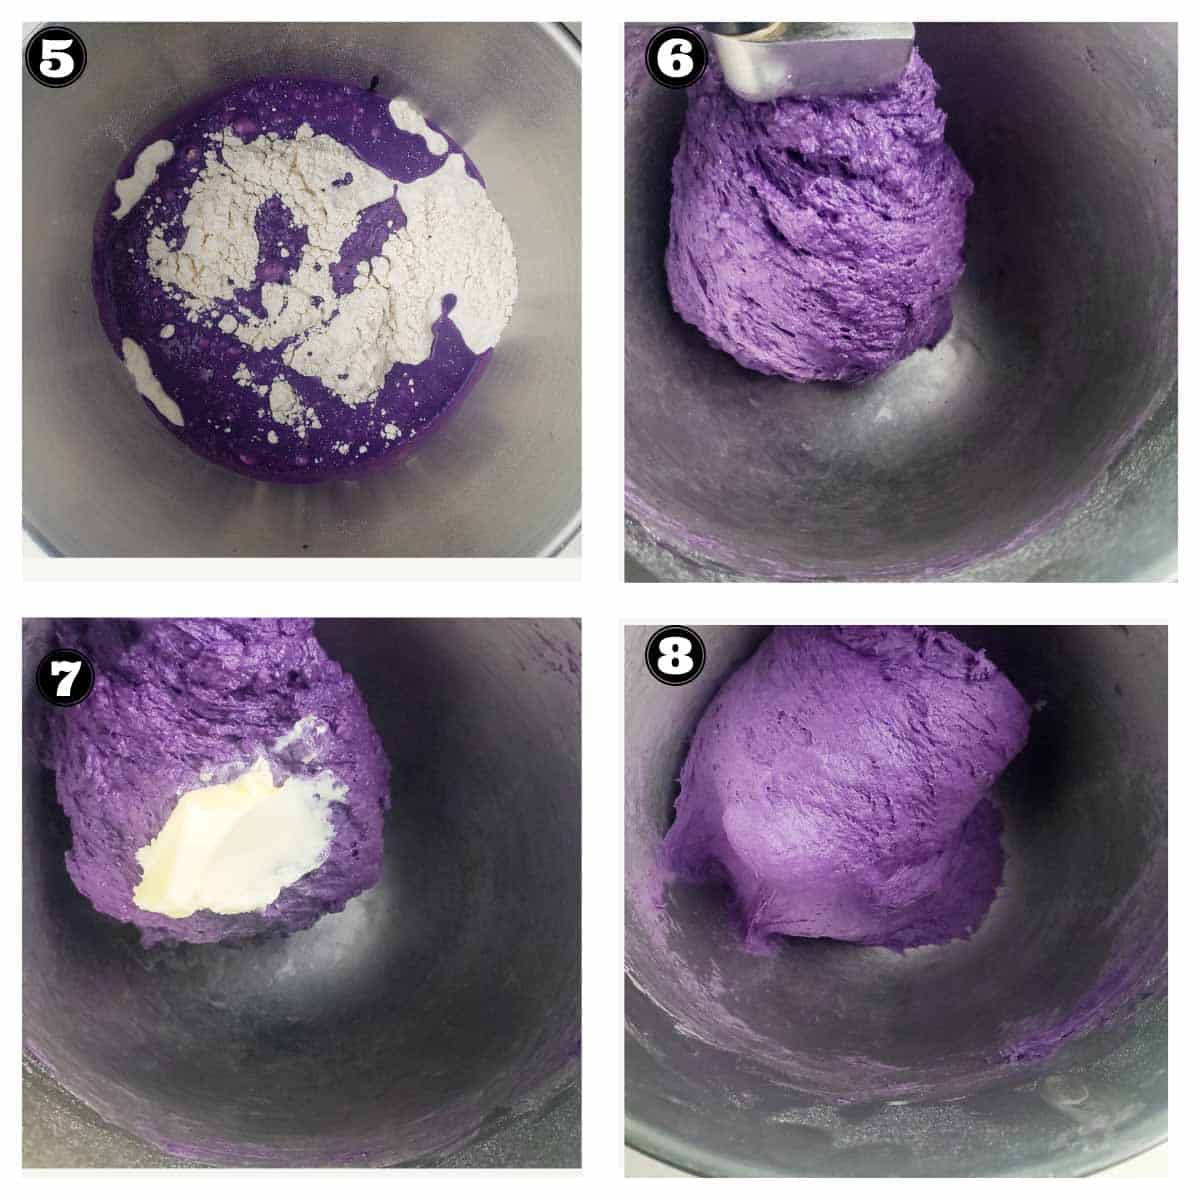 images showing step by step kneading process of ube dough